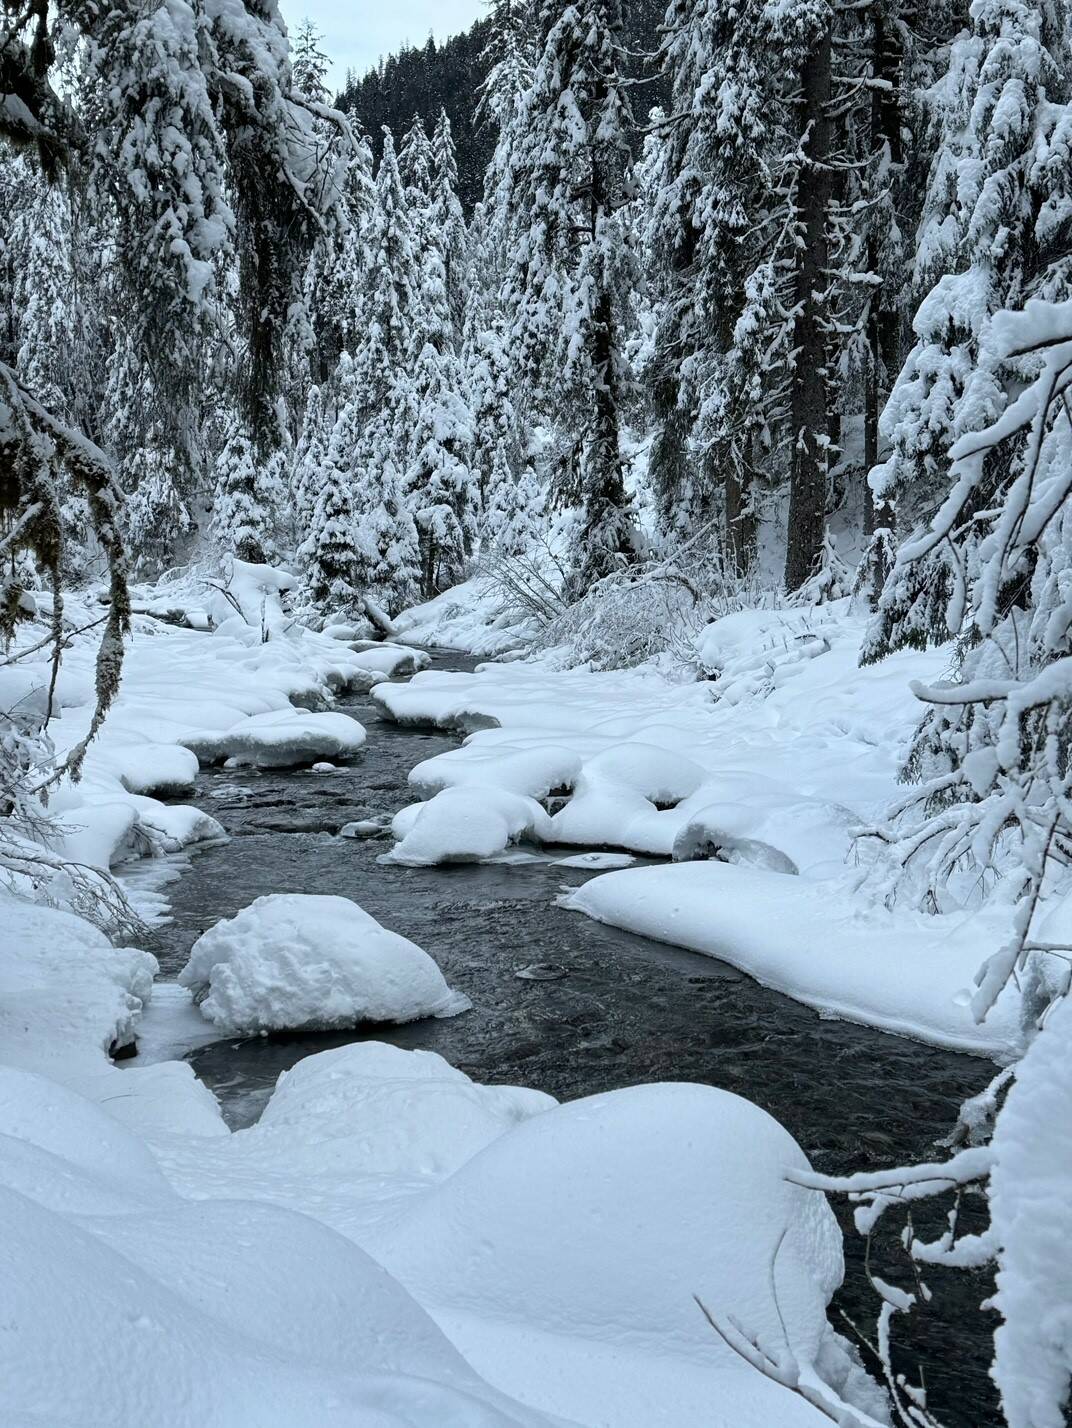 A babbling brook wends its way through the snowy forest along Montana Creek Road Jan. 20. (Photo by Denise Carroll)